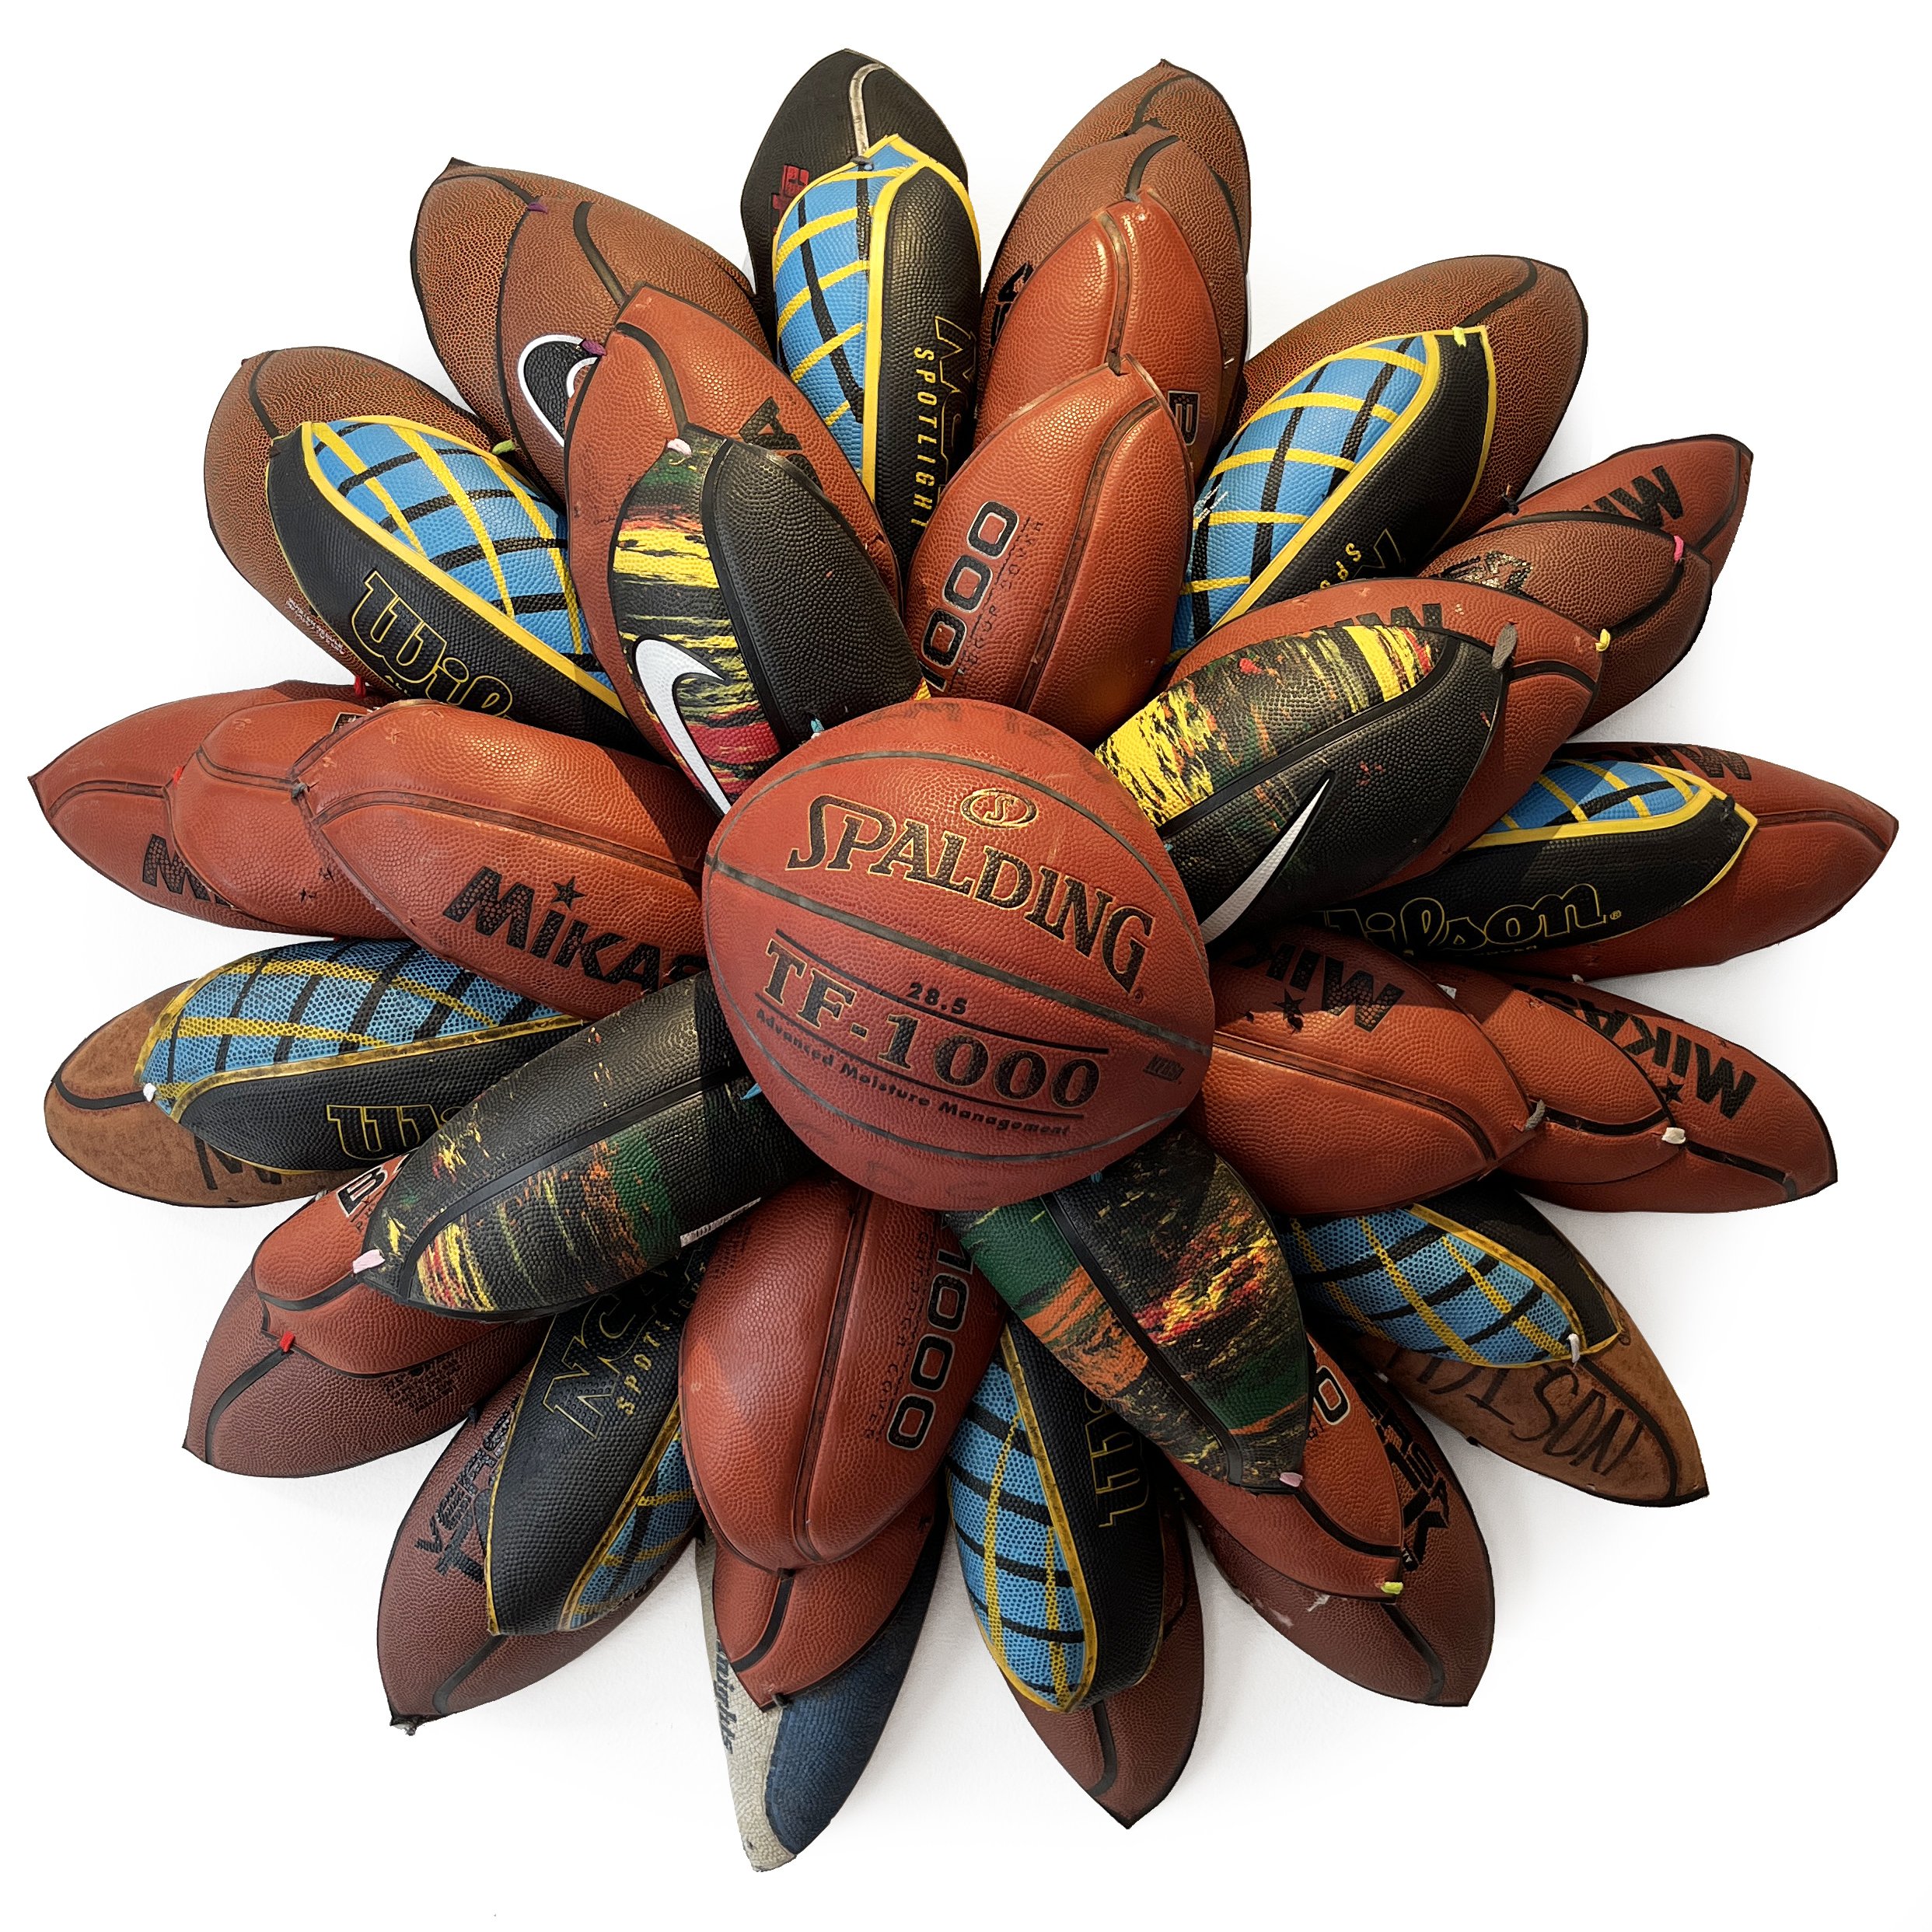 BASKETBALL BLOOM (TF-1000 CRS) | 39 x 39 x 9 inches / 99 x 99 x 23 cm, searched for and collected basketballs, shoestrings, 2022